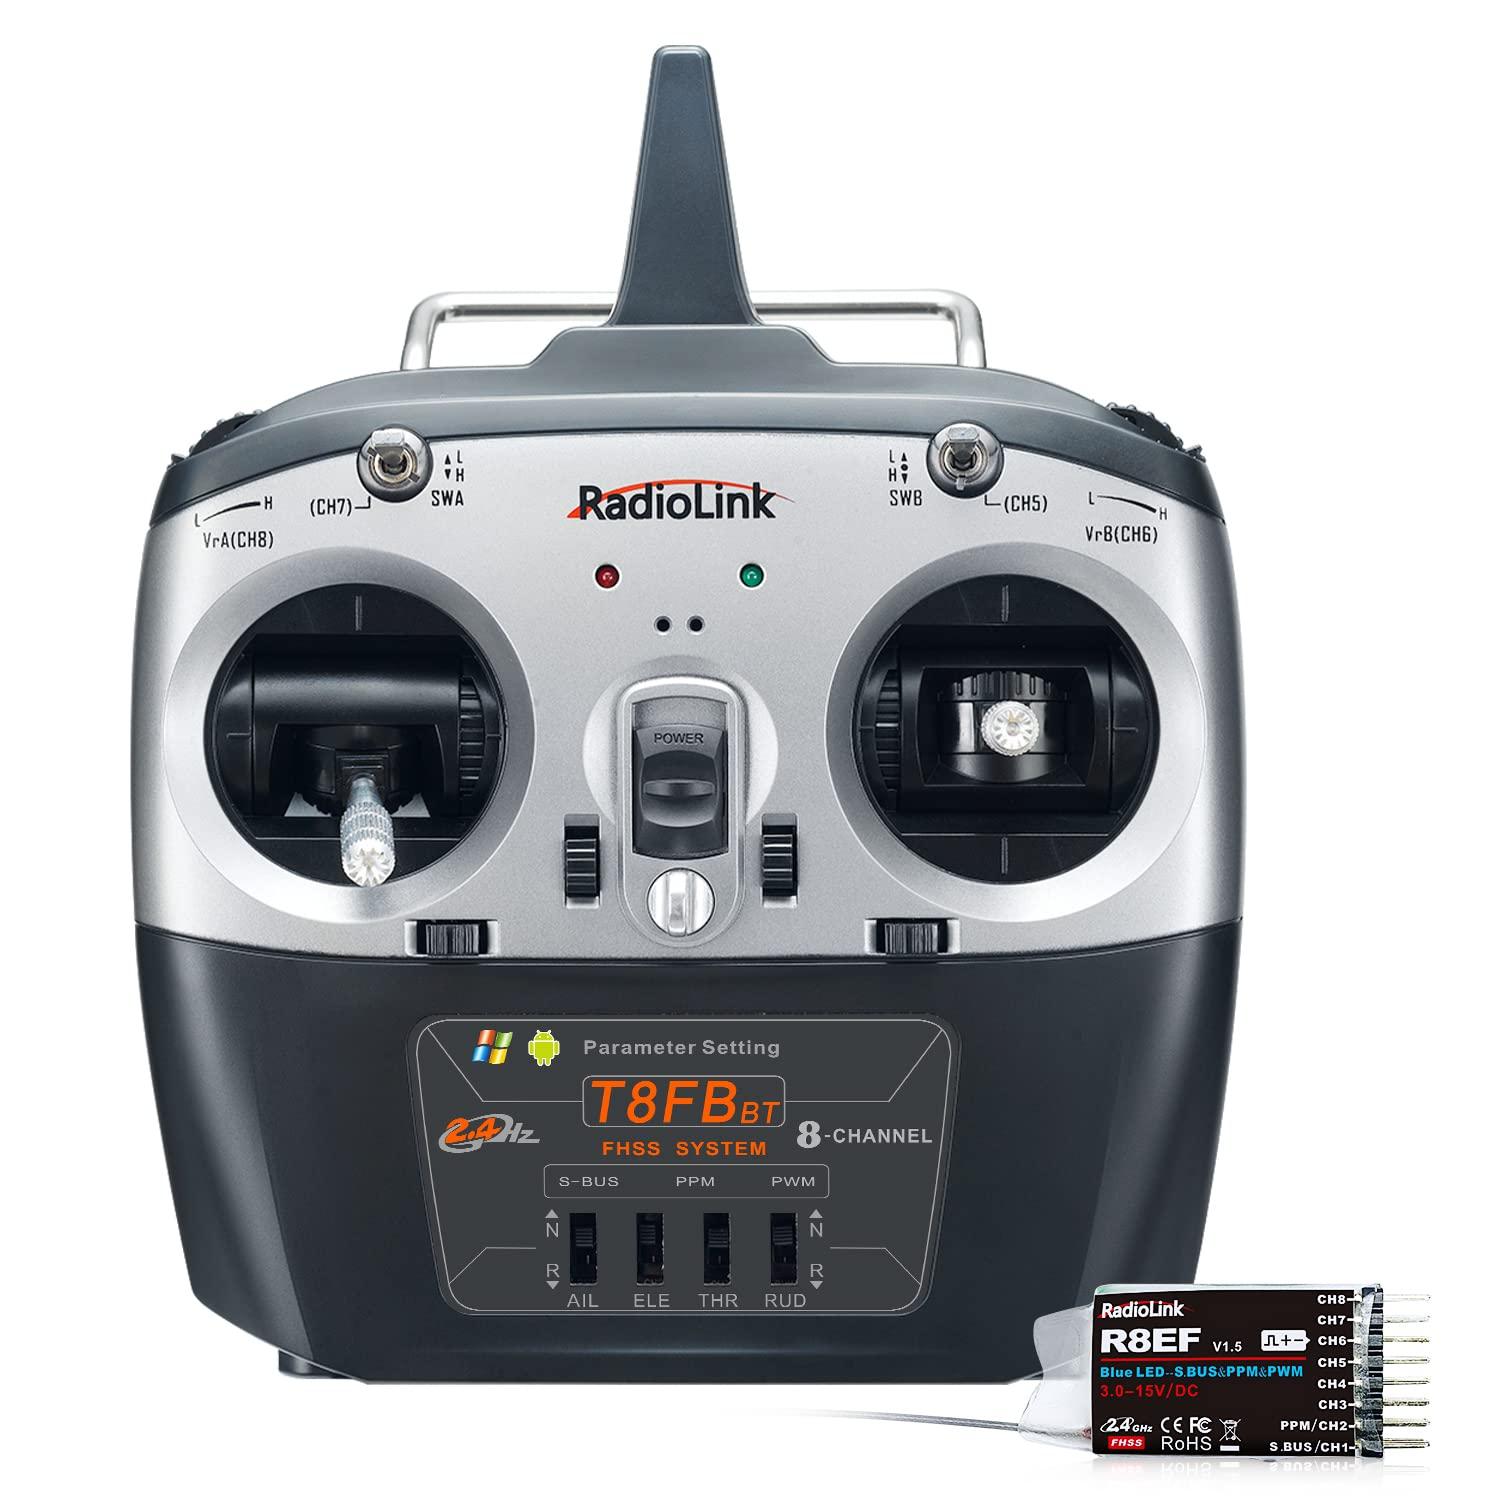 Rc Plane Transmitter:  Consider Compatibility with RC Plane Receiver